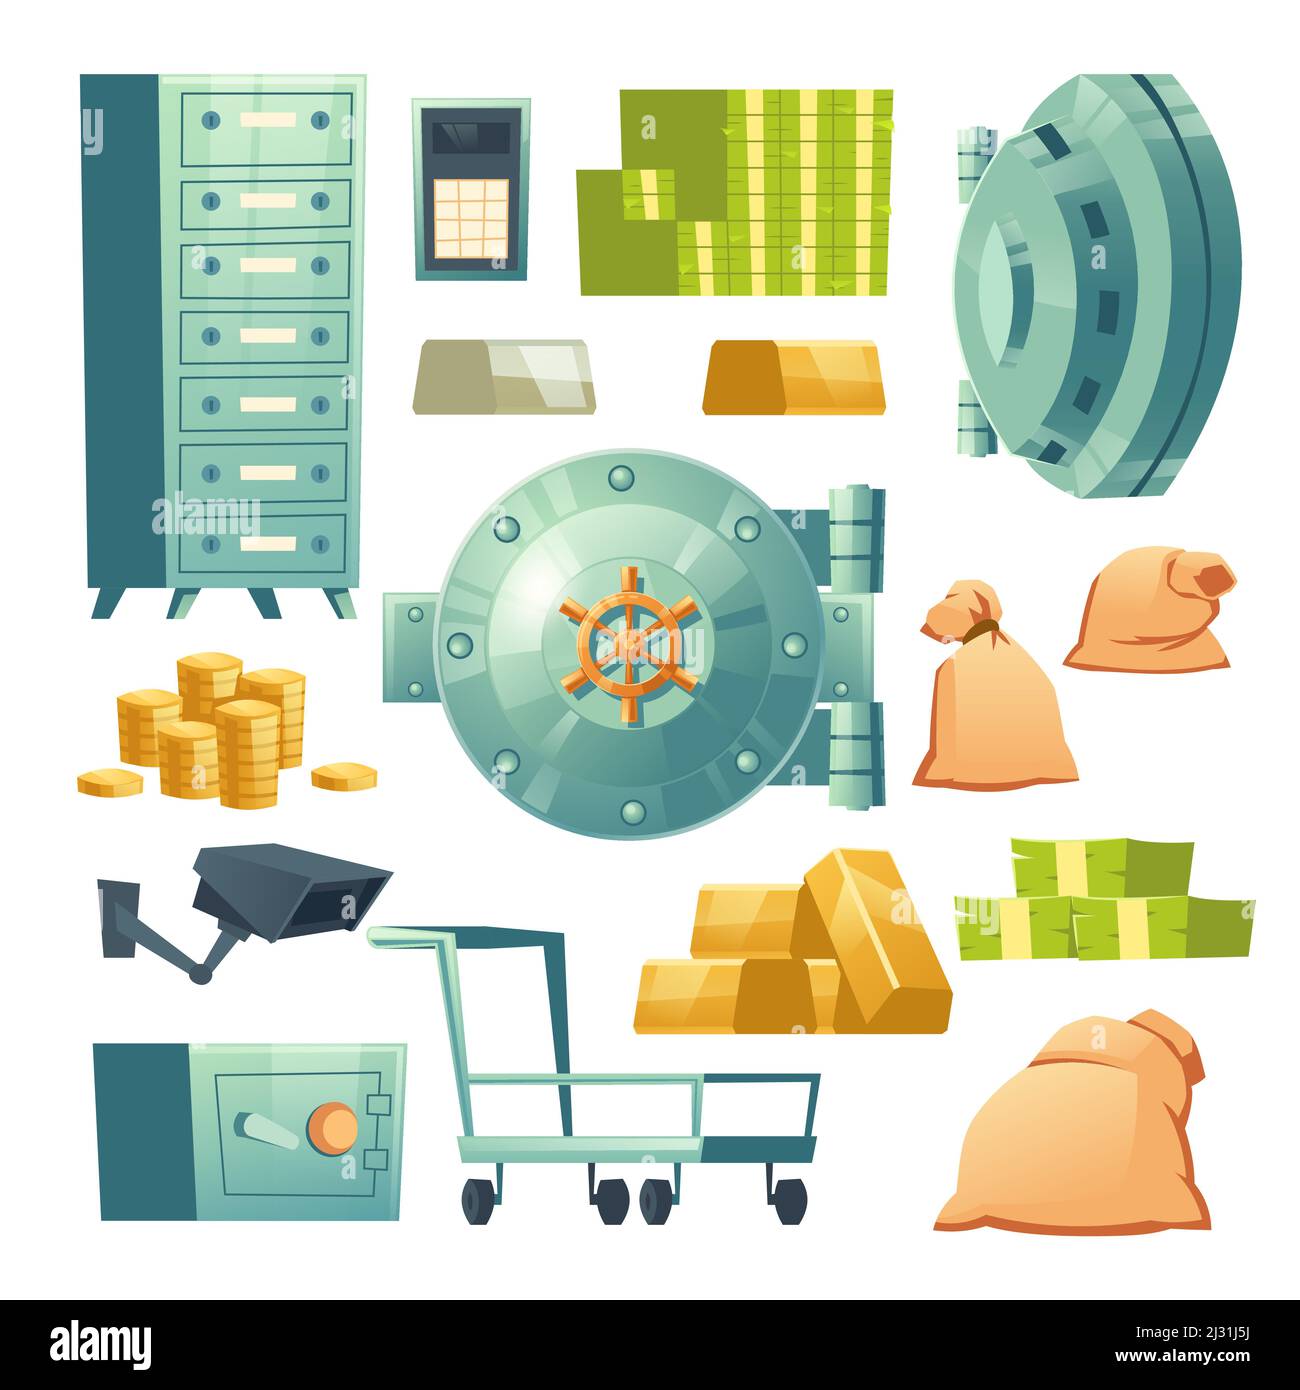 Money cash in bank vault. Vector cartoon icons set of deposit safe boxes, round metal doors, dollar banknotes and coins, gold ingots and push cart. Fi Stock Vector